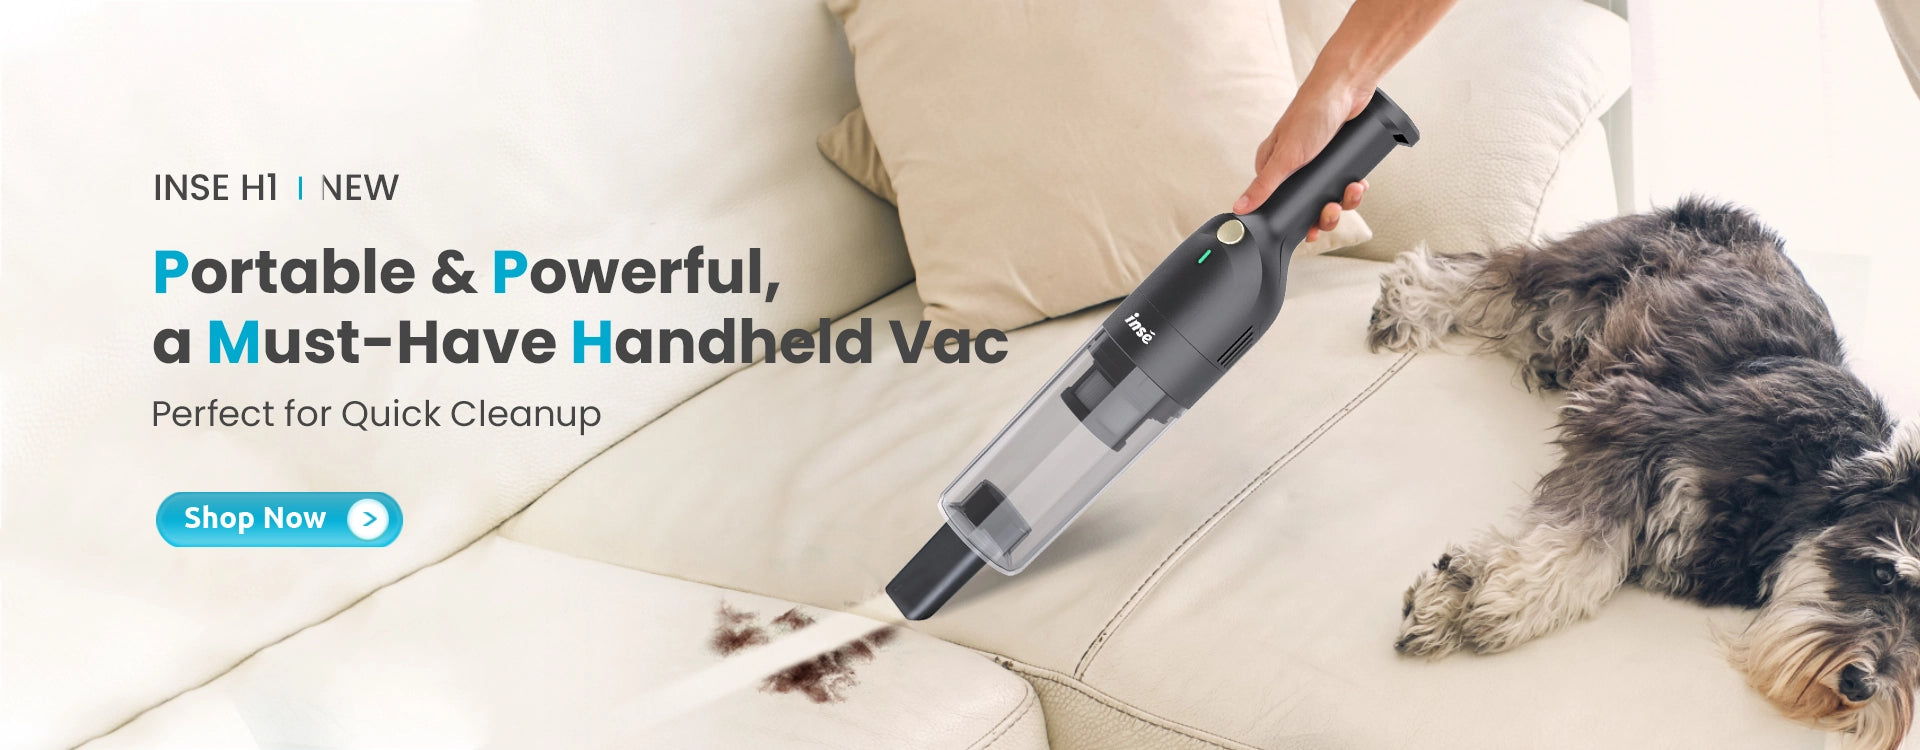 inse_h1_cordless_handheld_vacuum_new_product_release_banner_for_desktop